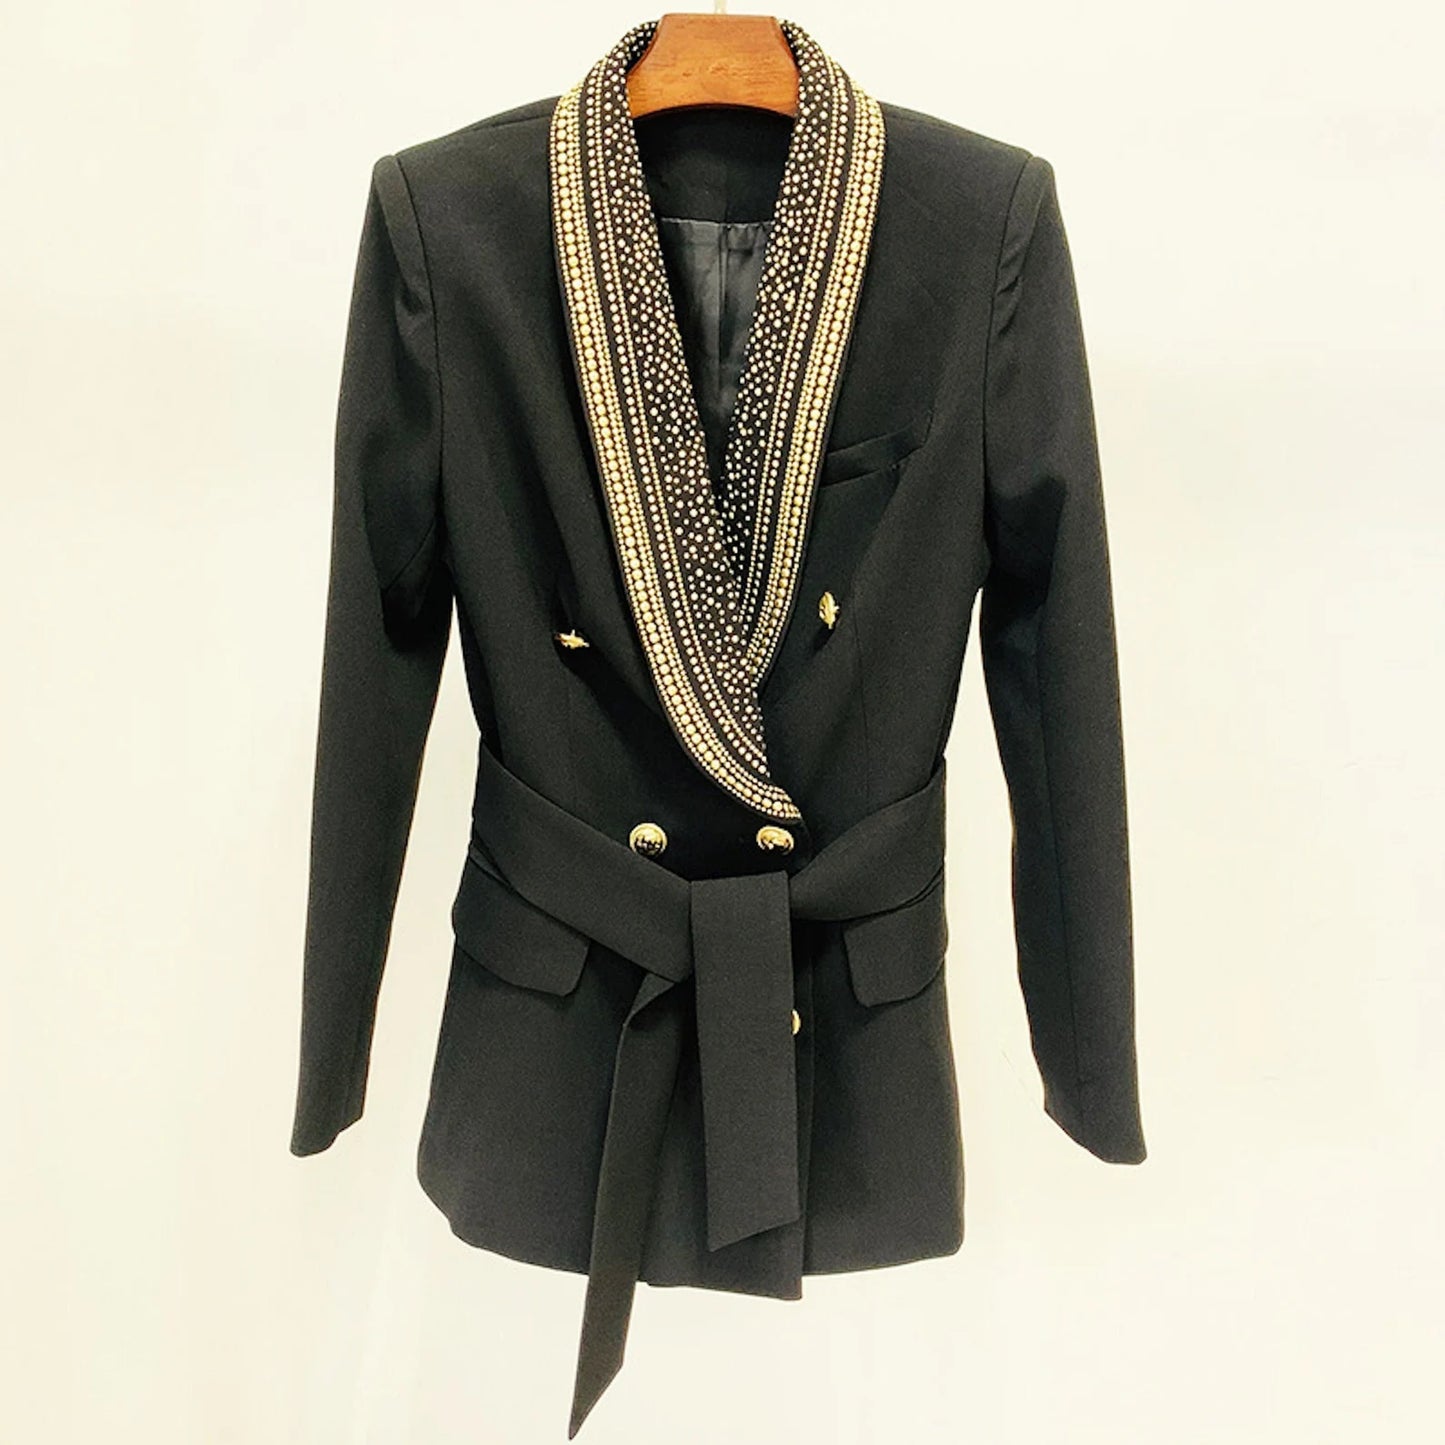 Black Blazer Women's Shawl Collar Belted Mid- Length Studded   Jacket with a belted waist, a shawl collar, a double-breasted closure, buttoned cuffs, side pockets, a breast pocket, and a snap-button closure. Wearable for business meetings, everyday wear, formal dates, office work, vacation, and outdoor activities. The simple and Shawl Collar neck line is a classic fashion design.